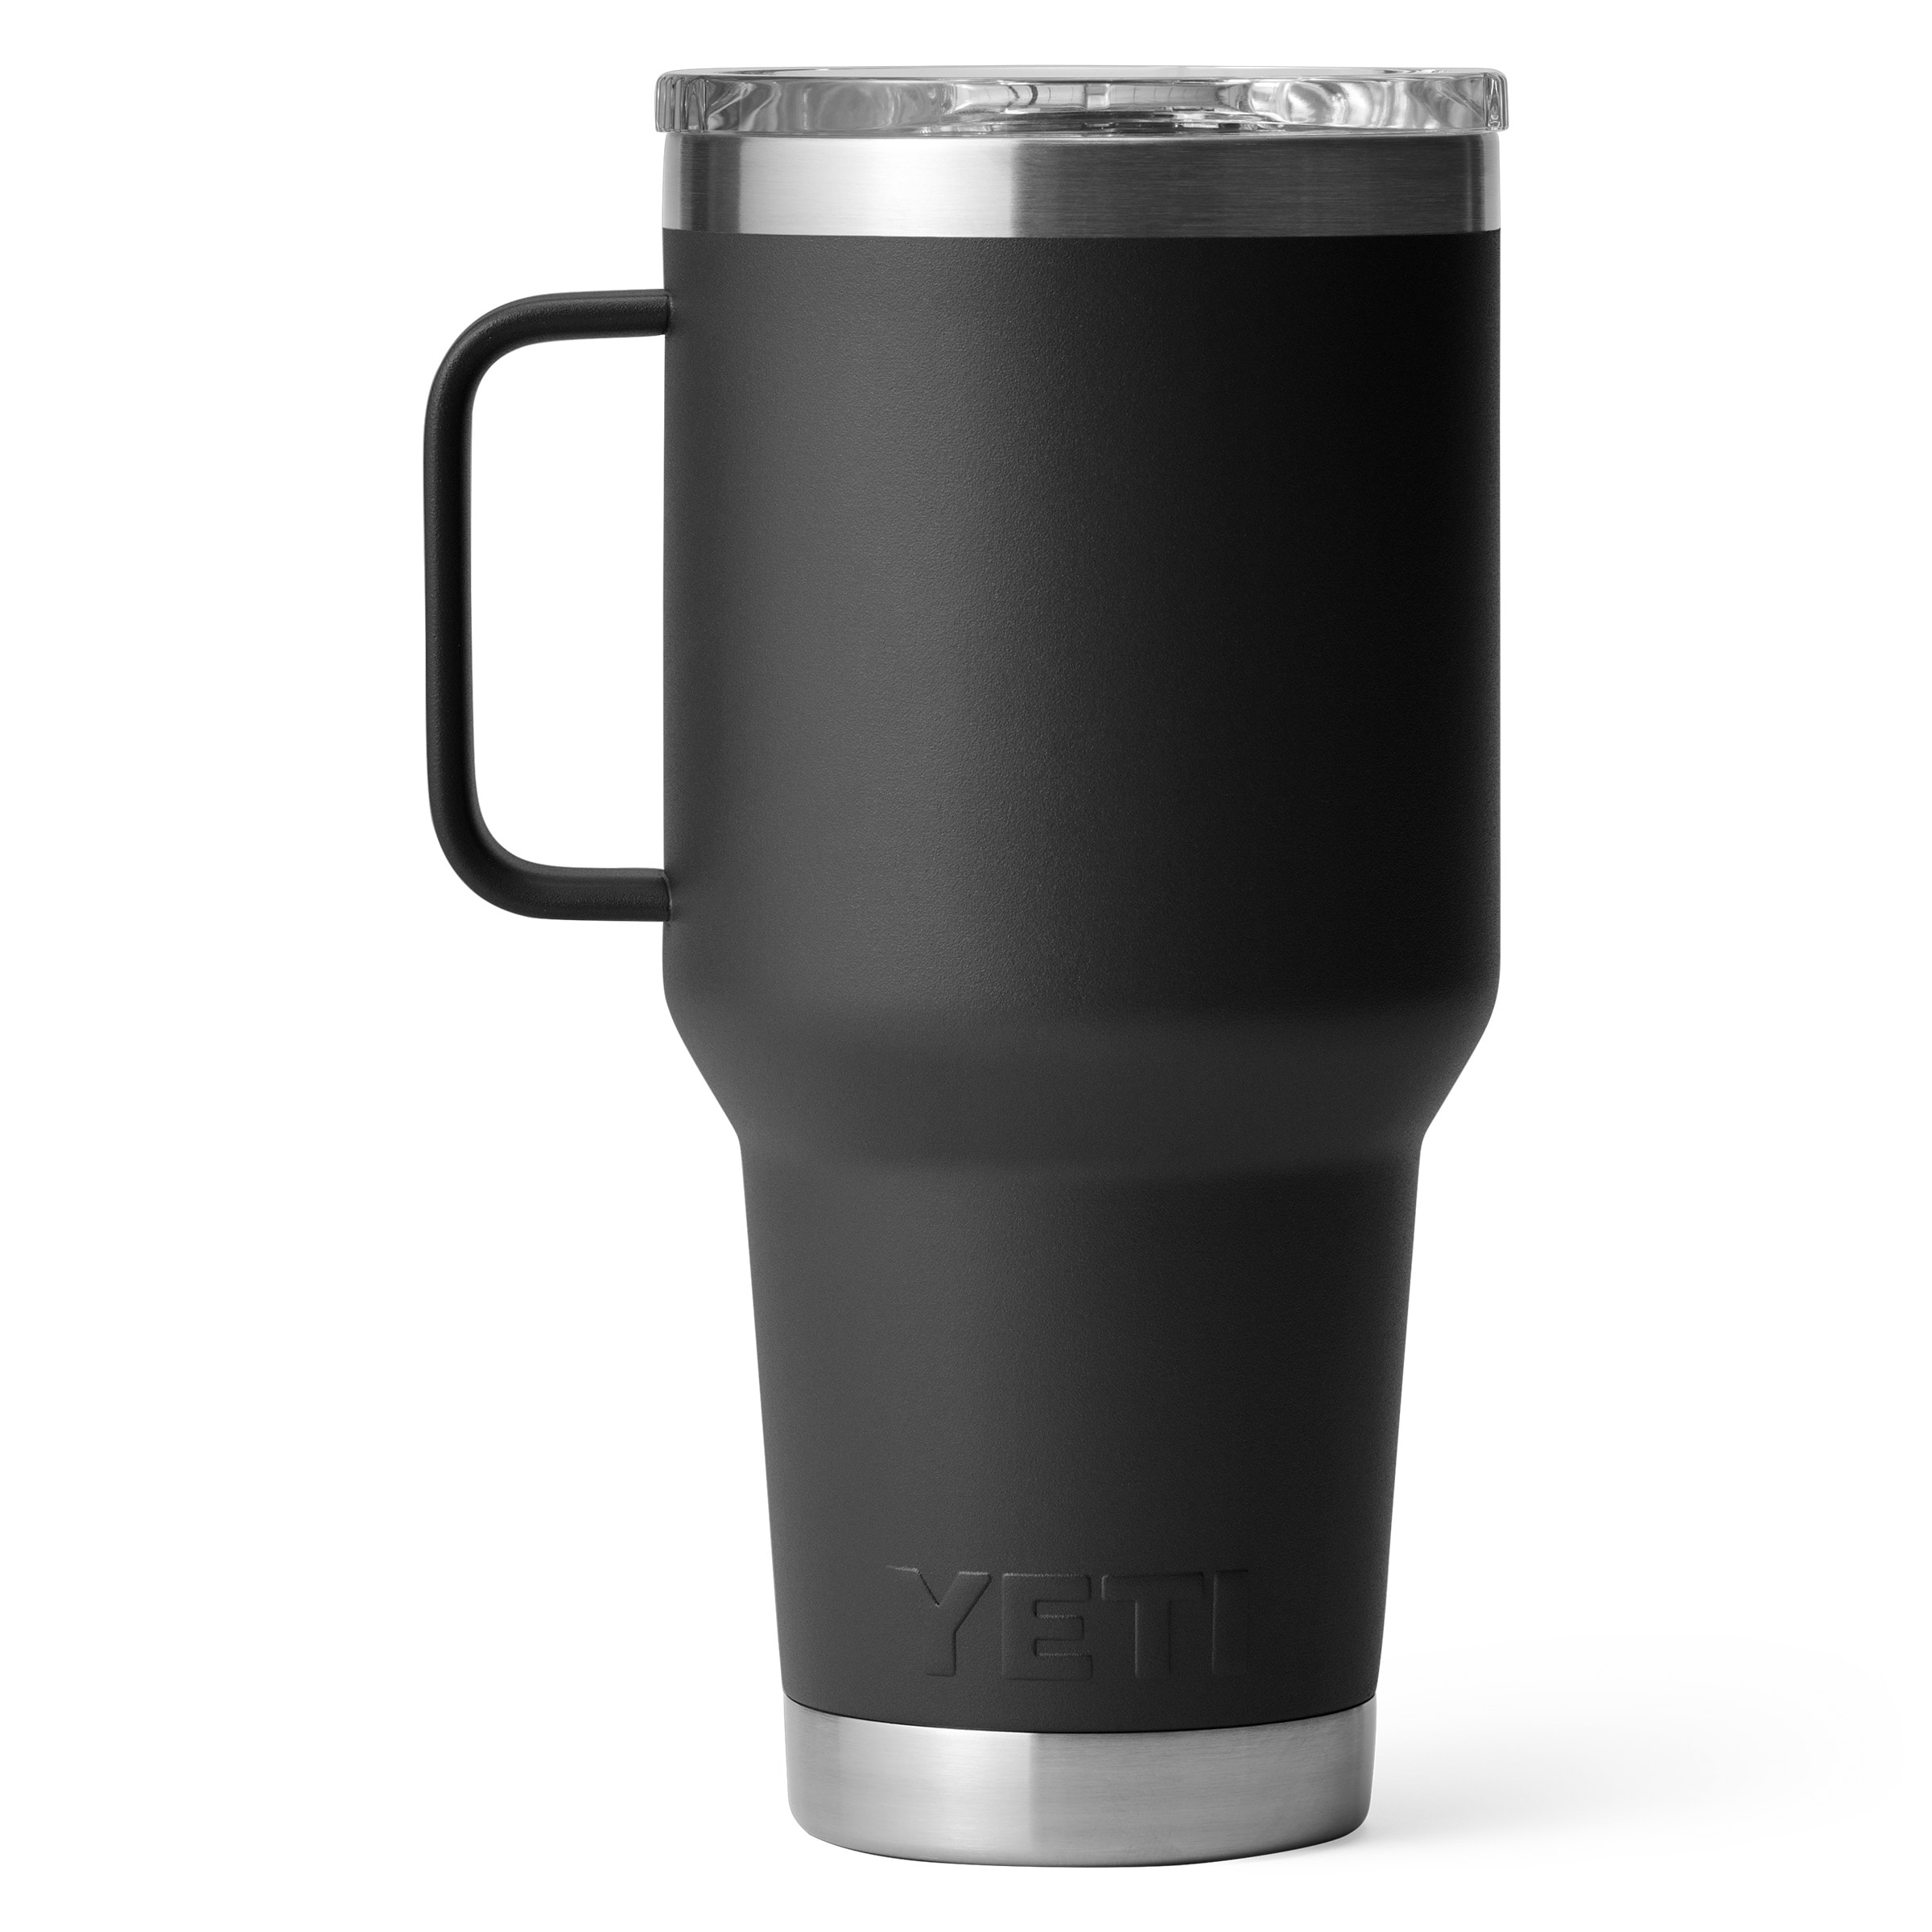 The 10 oz tumbler doesn't get much love around here : r/YetiCoolers